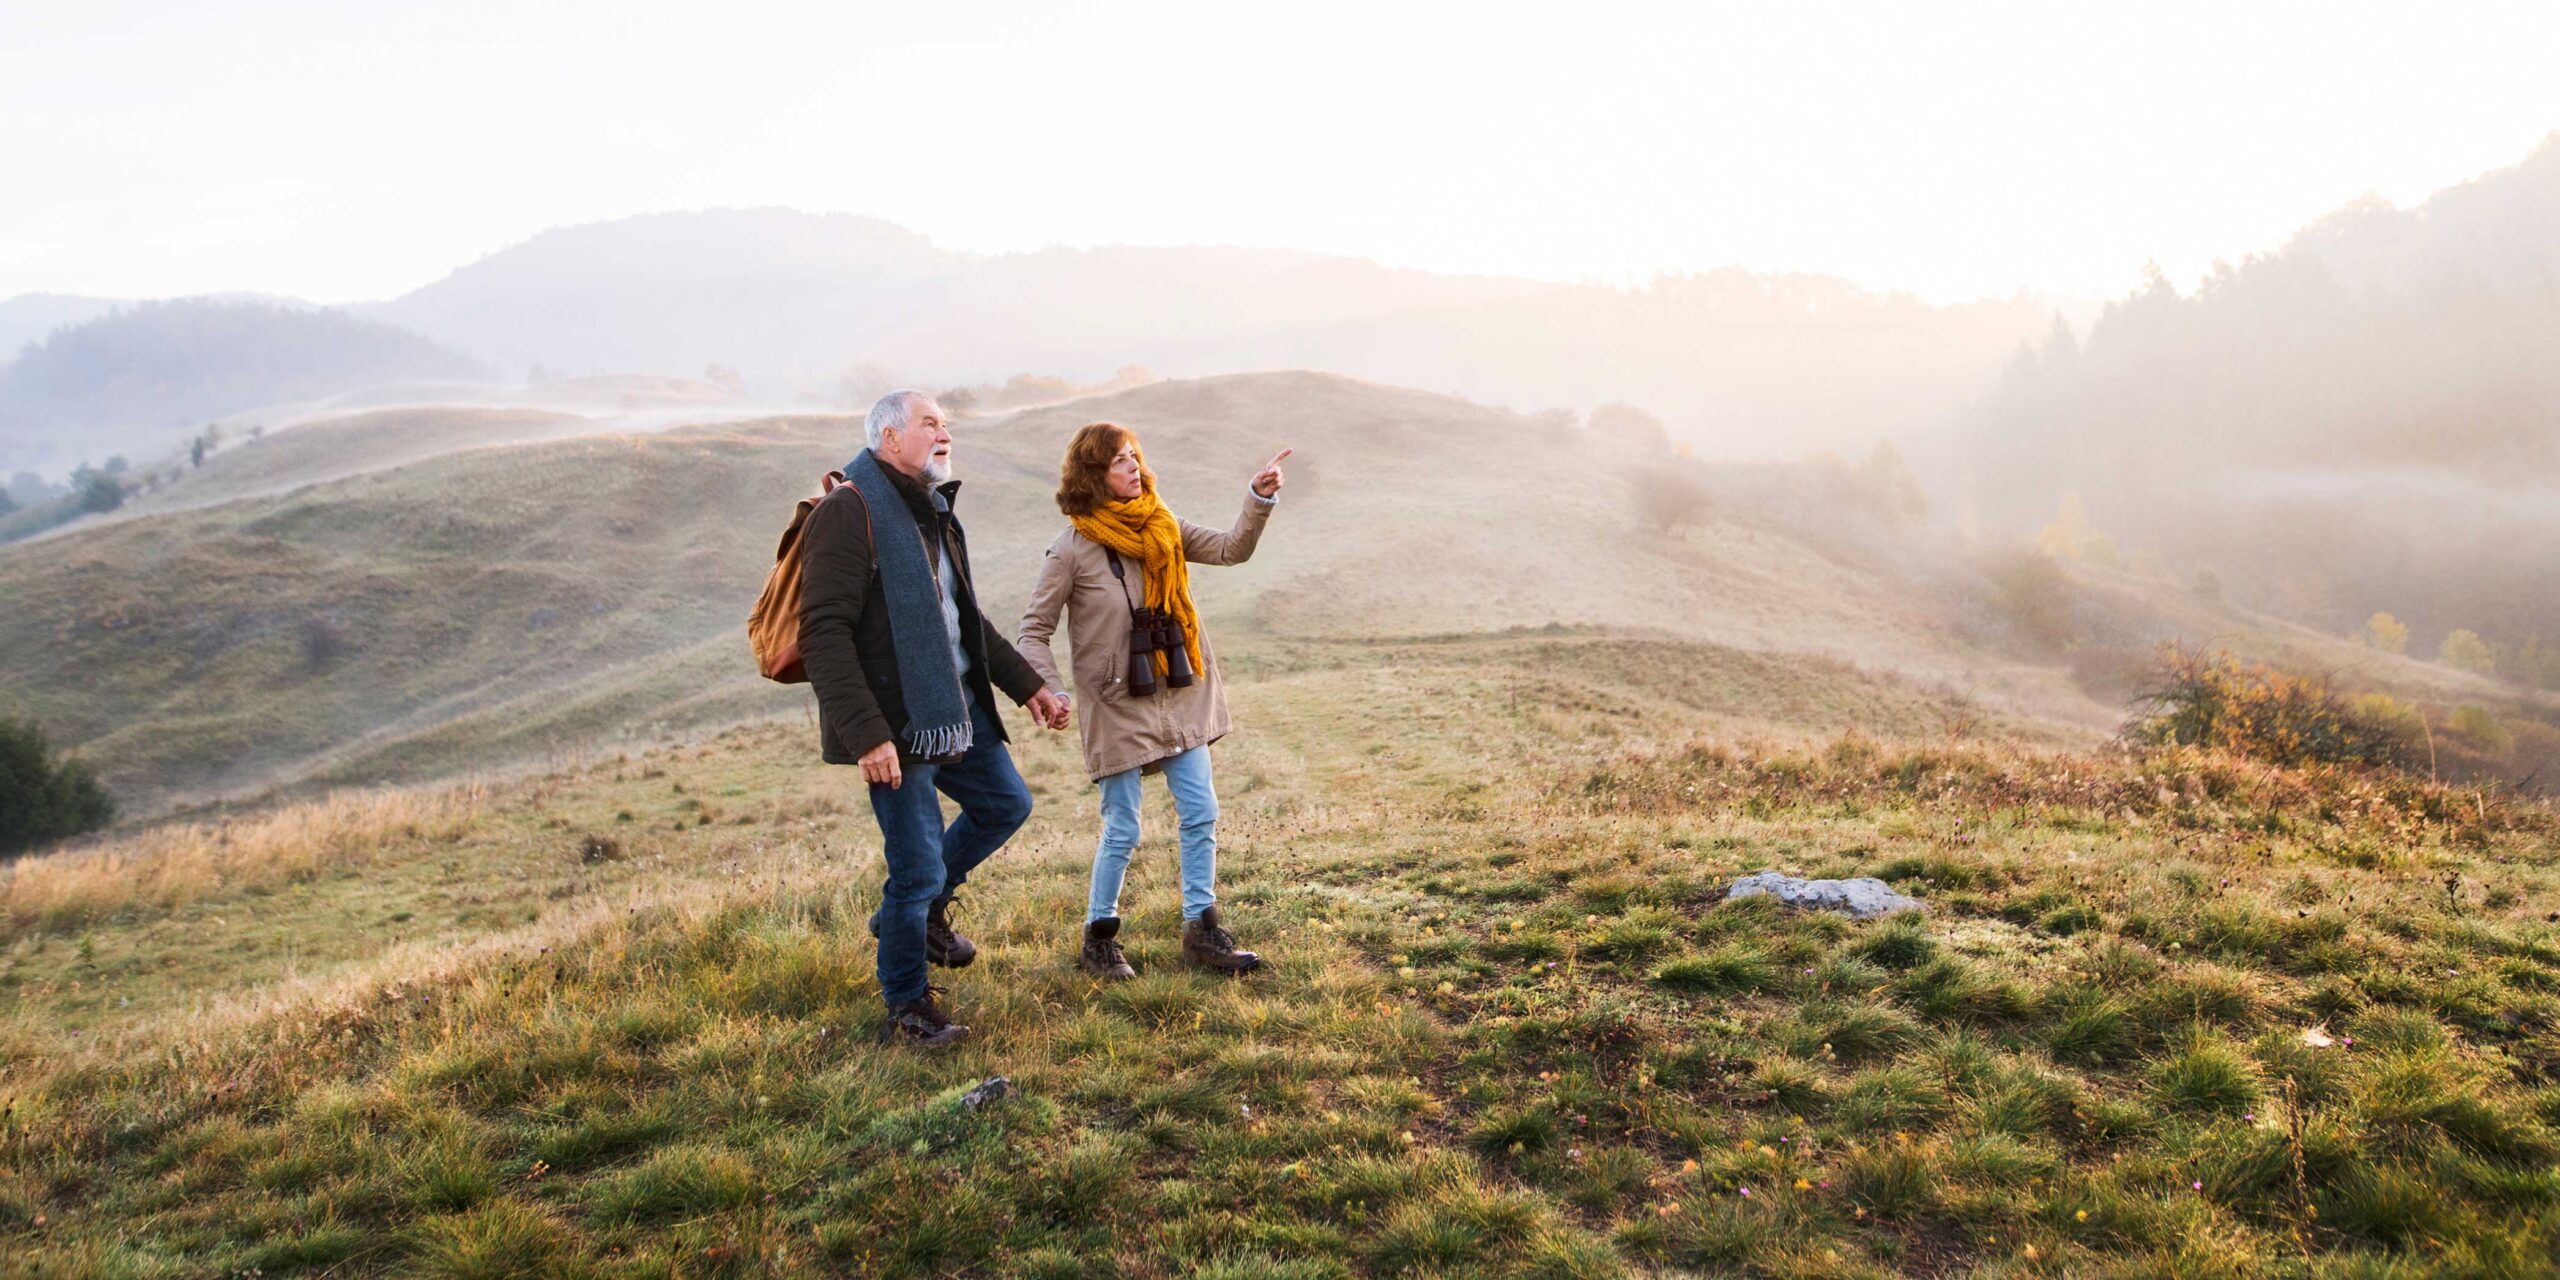 Middle-aged couple happily exploring a vast grassland, hand in hand, surrounded by the beauty of nature, with hills and foggy white skies in the background.